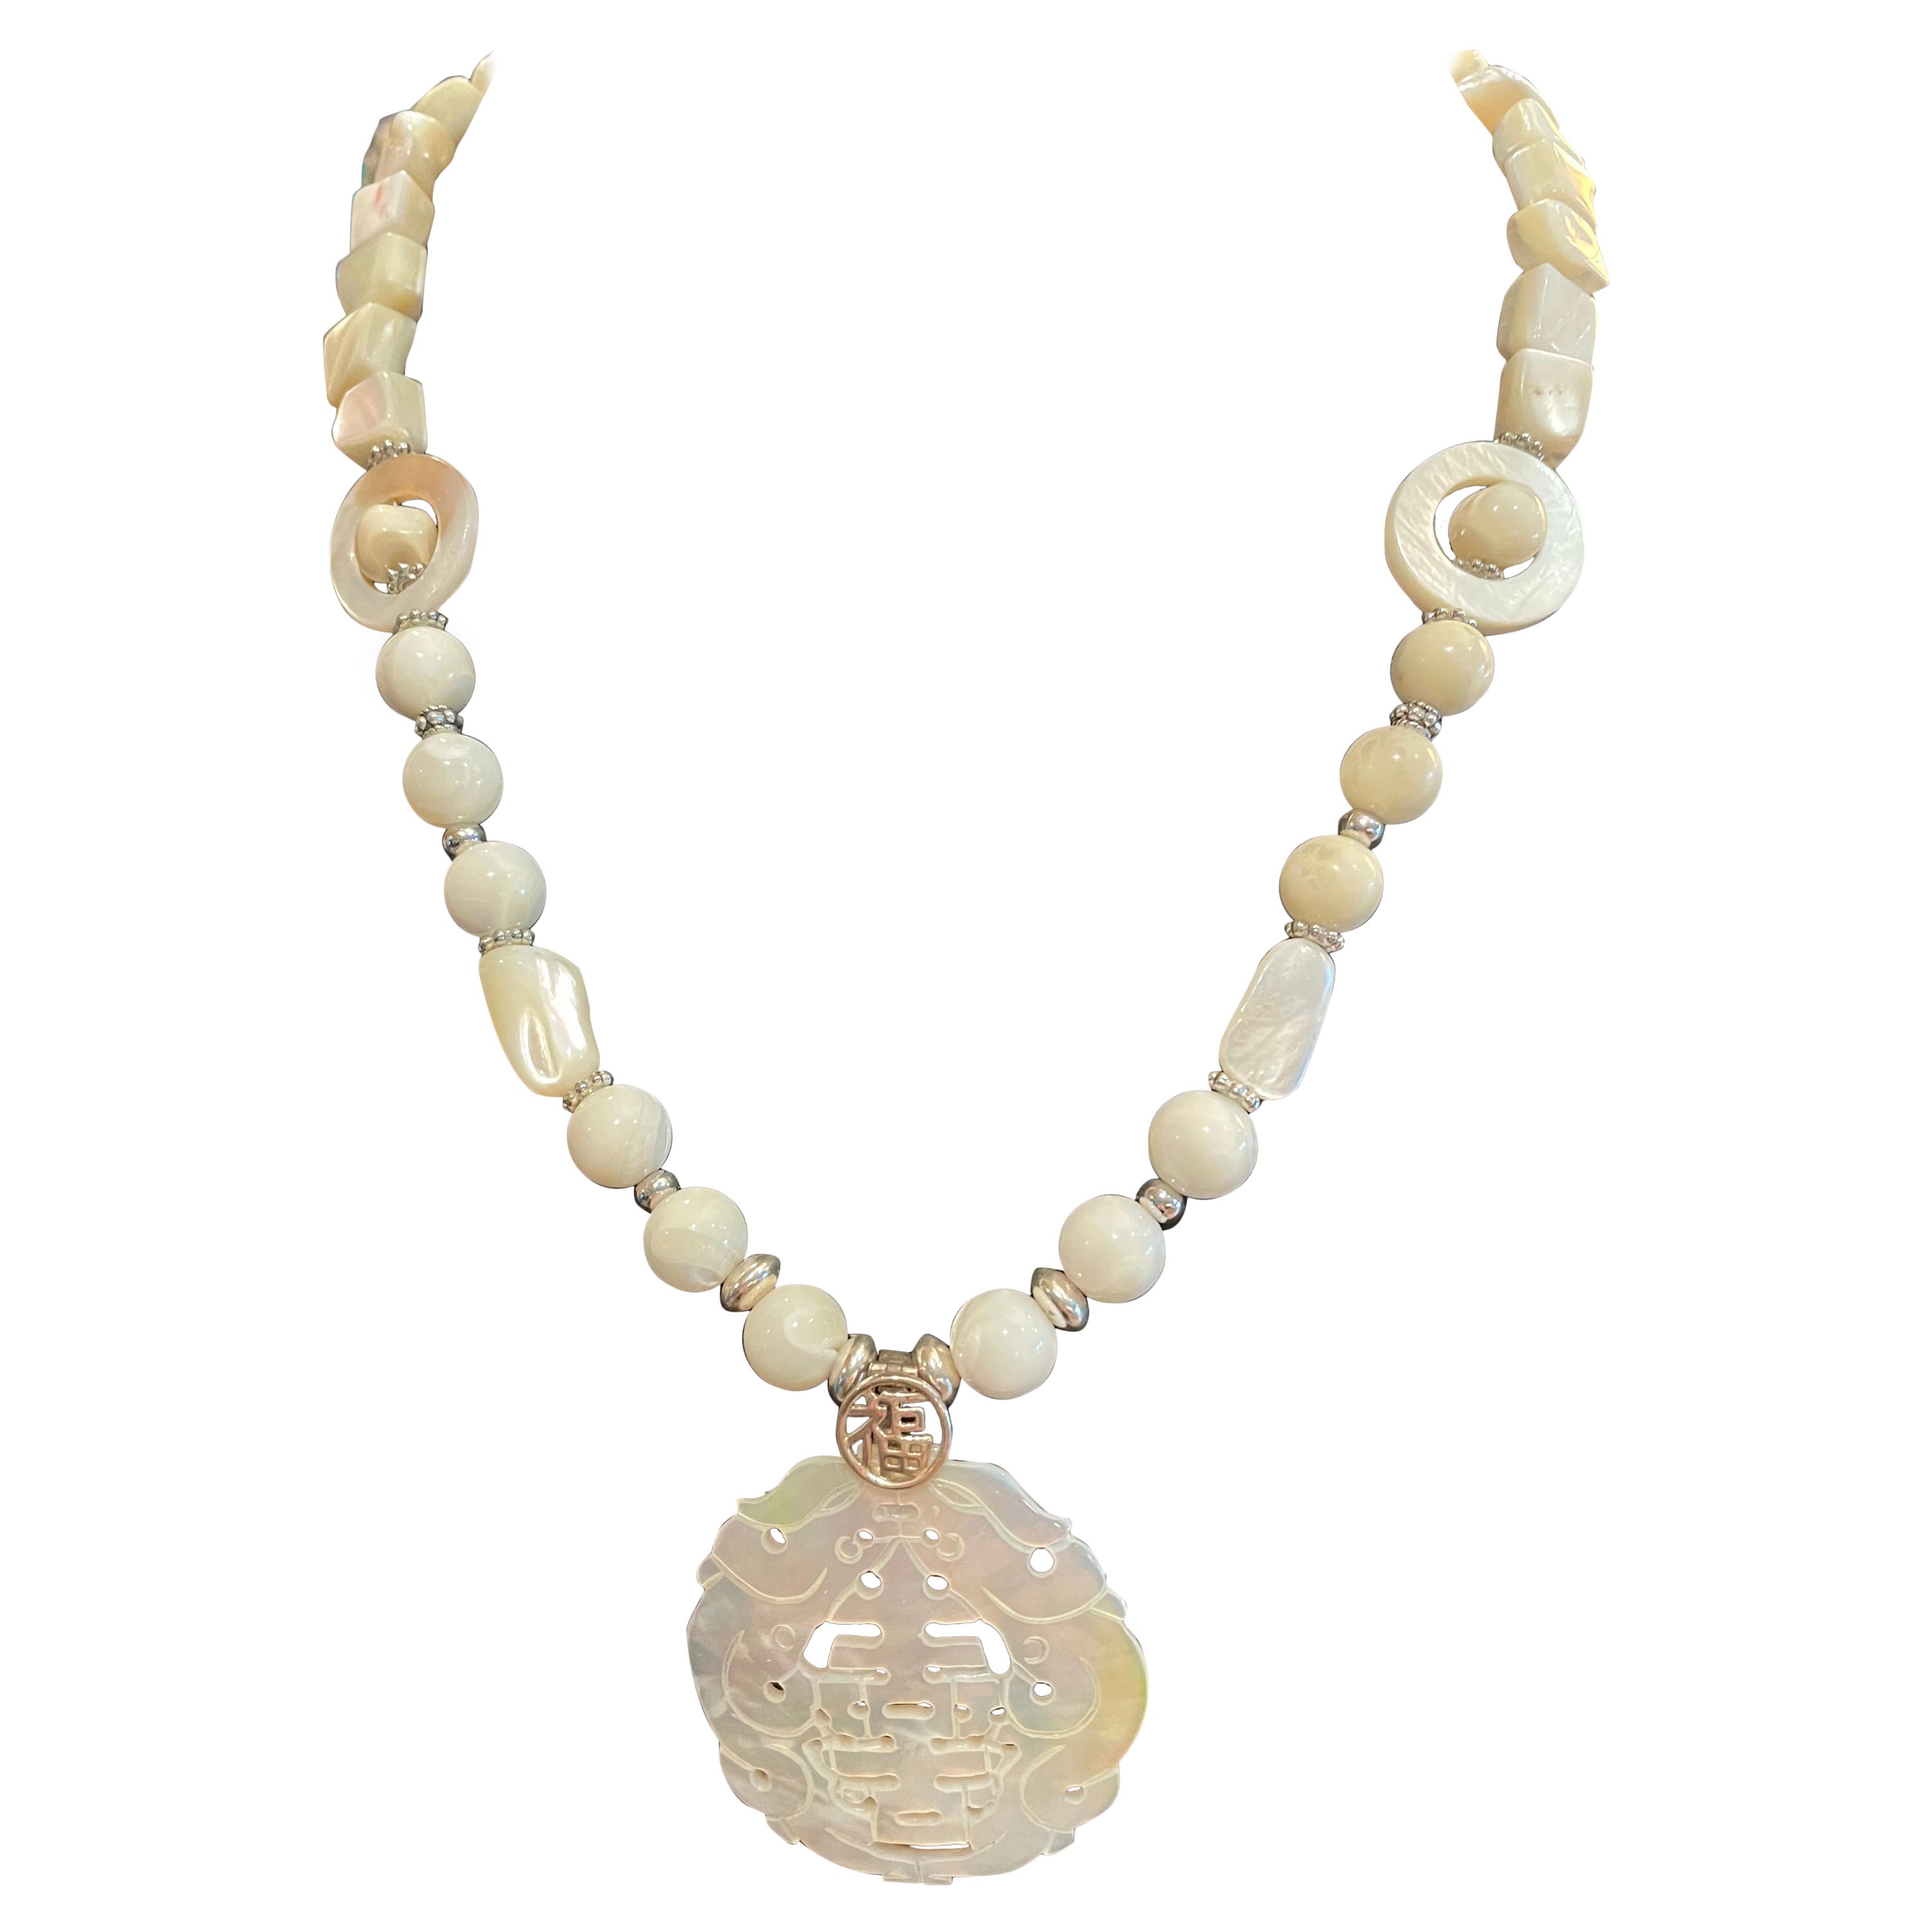 LB Antique carved Mother of Pearl Chinese pendant necklace with MOP beads For Sale